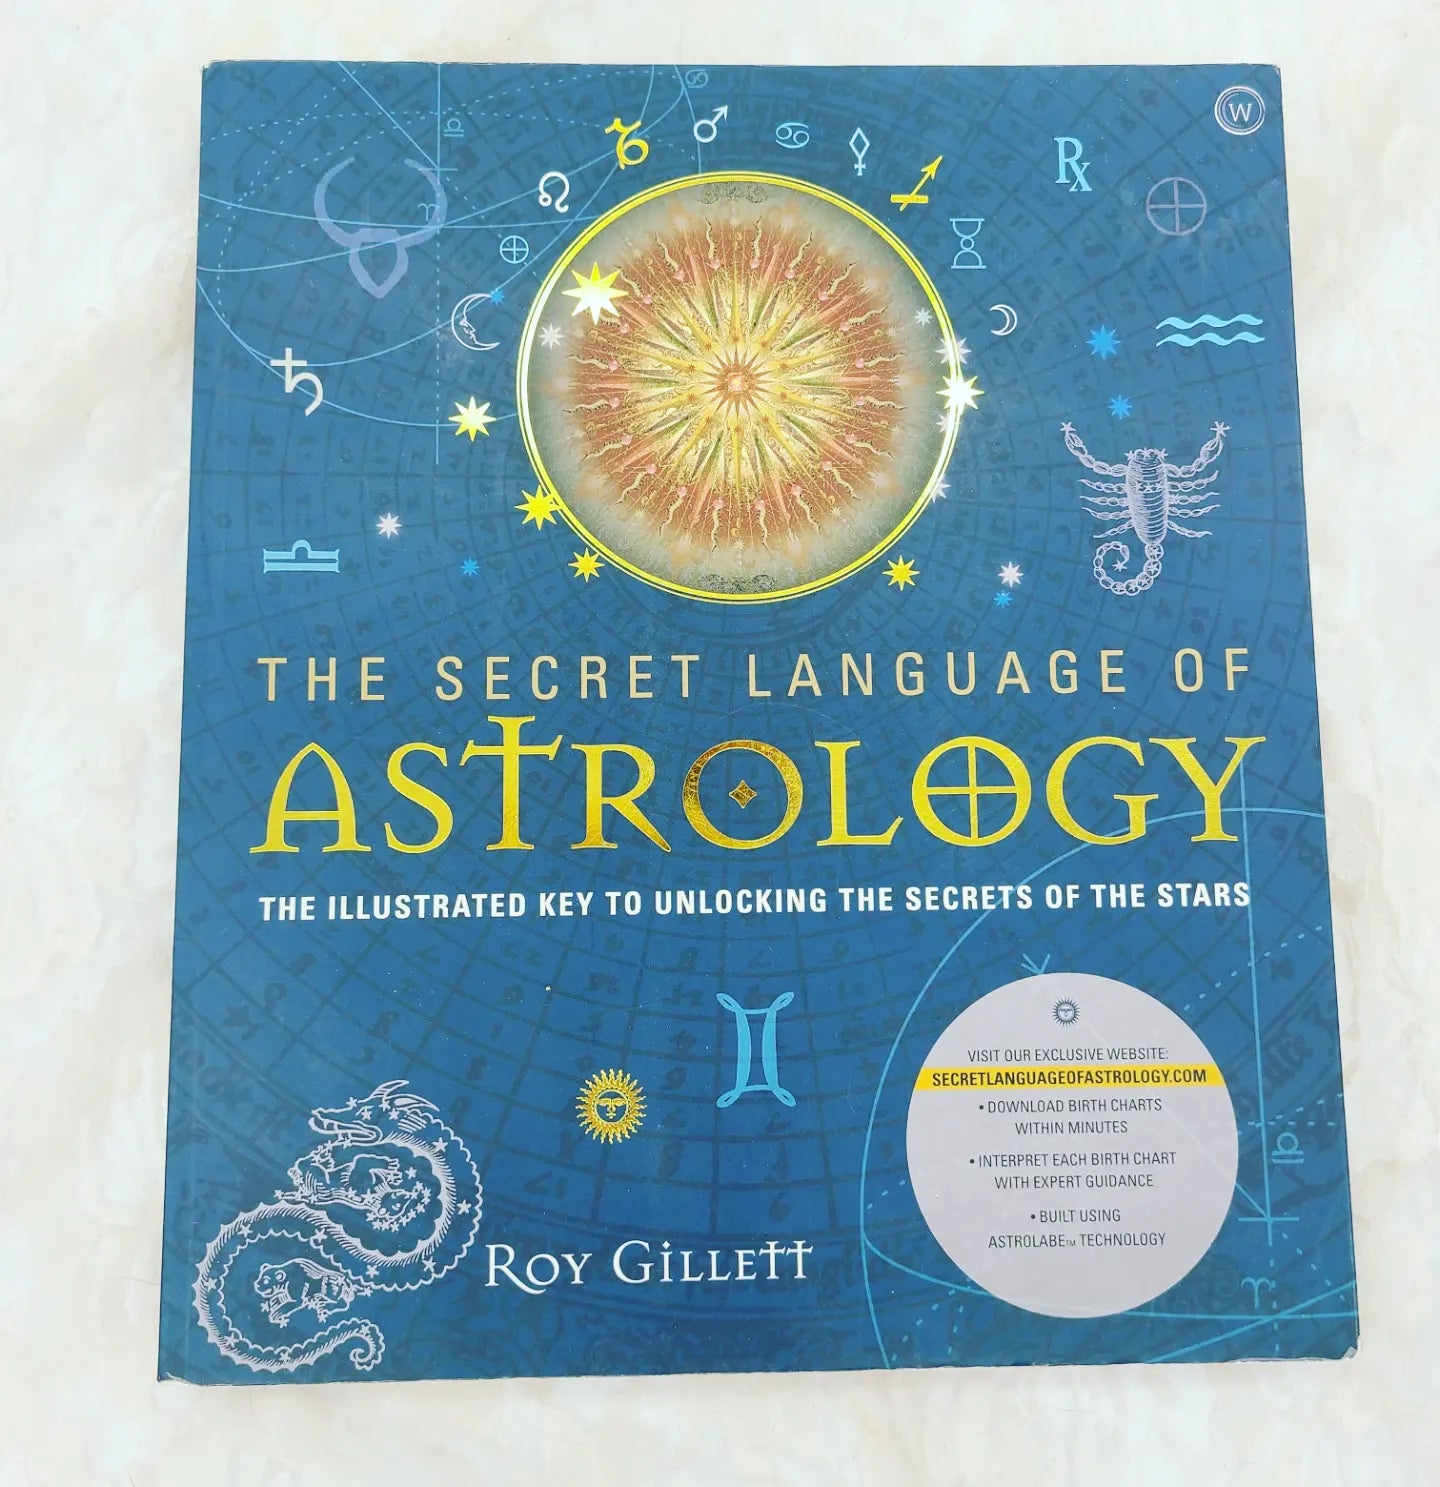 The Secret Language of Astrology PAPERBACK - 2017 by Roy Gillett